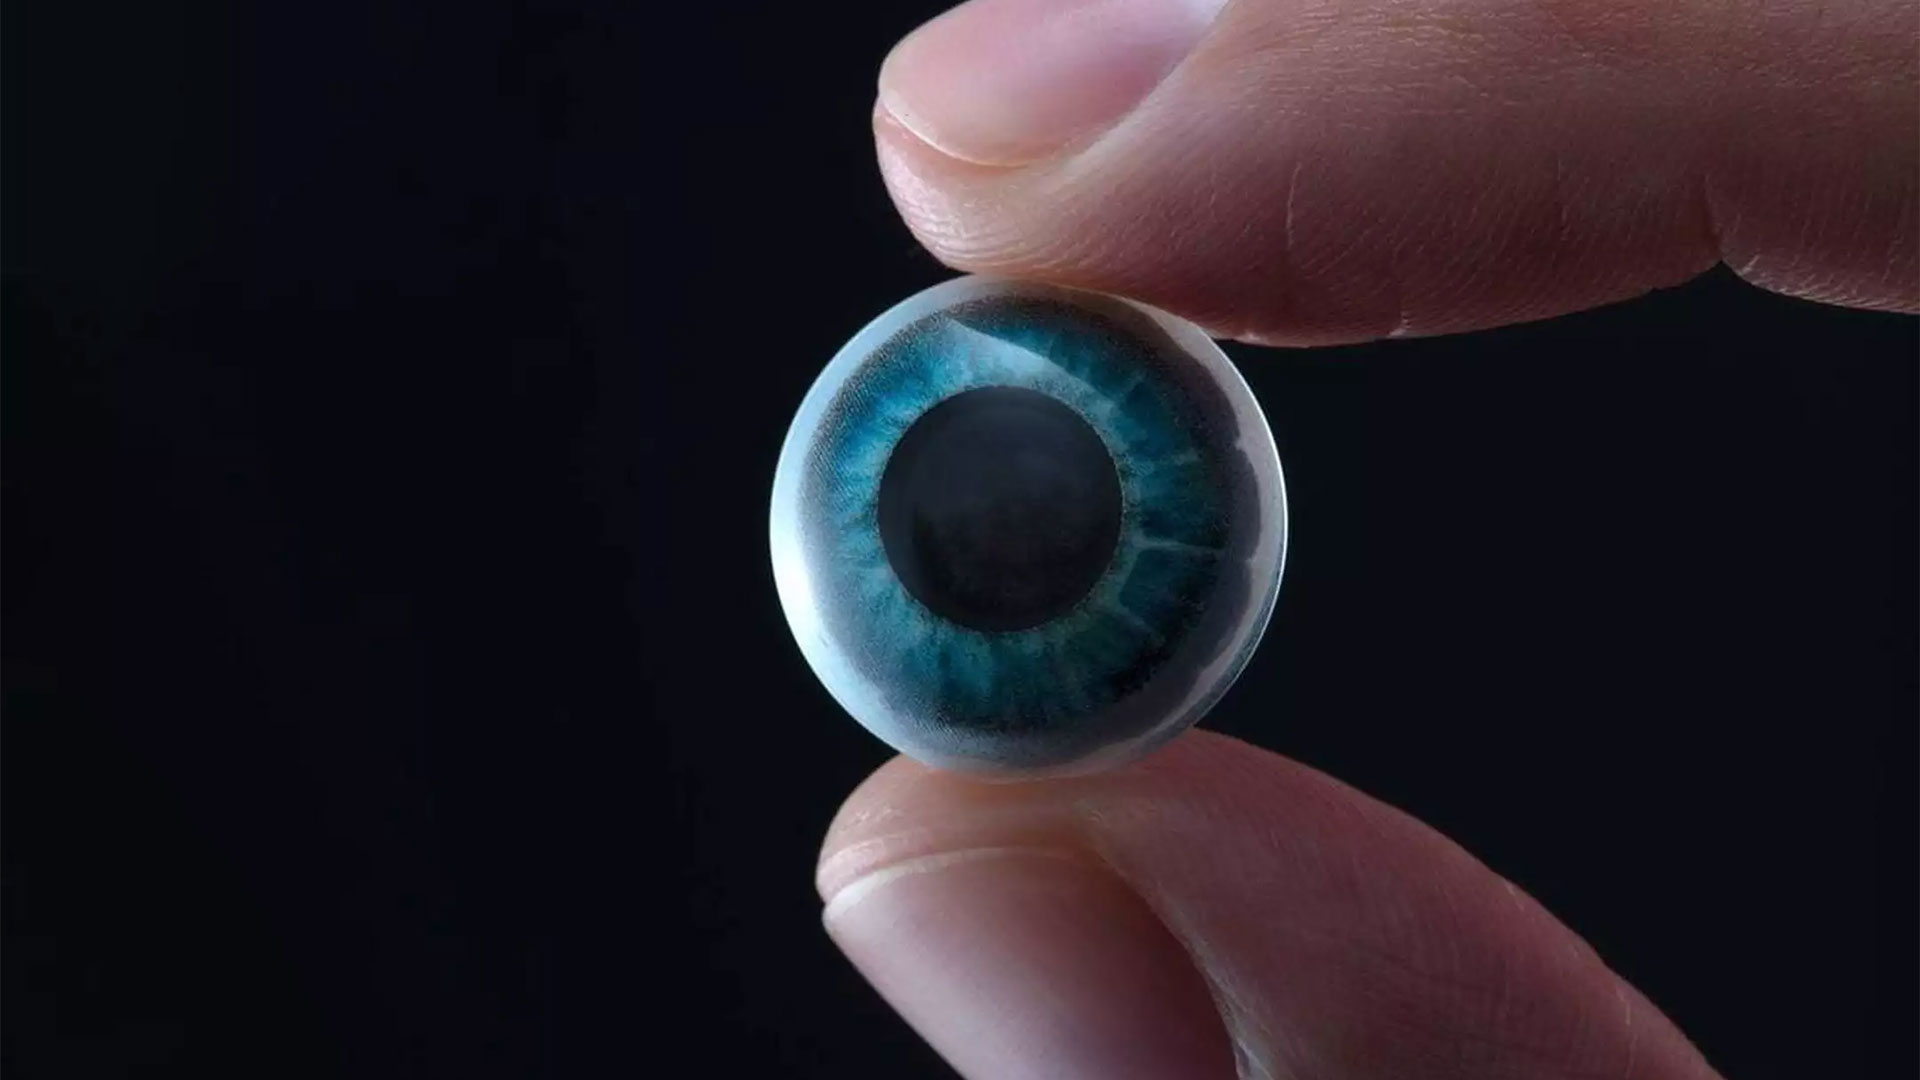 Mojo Vision AR contact lenses demos hands-on